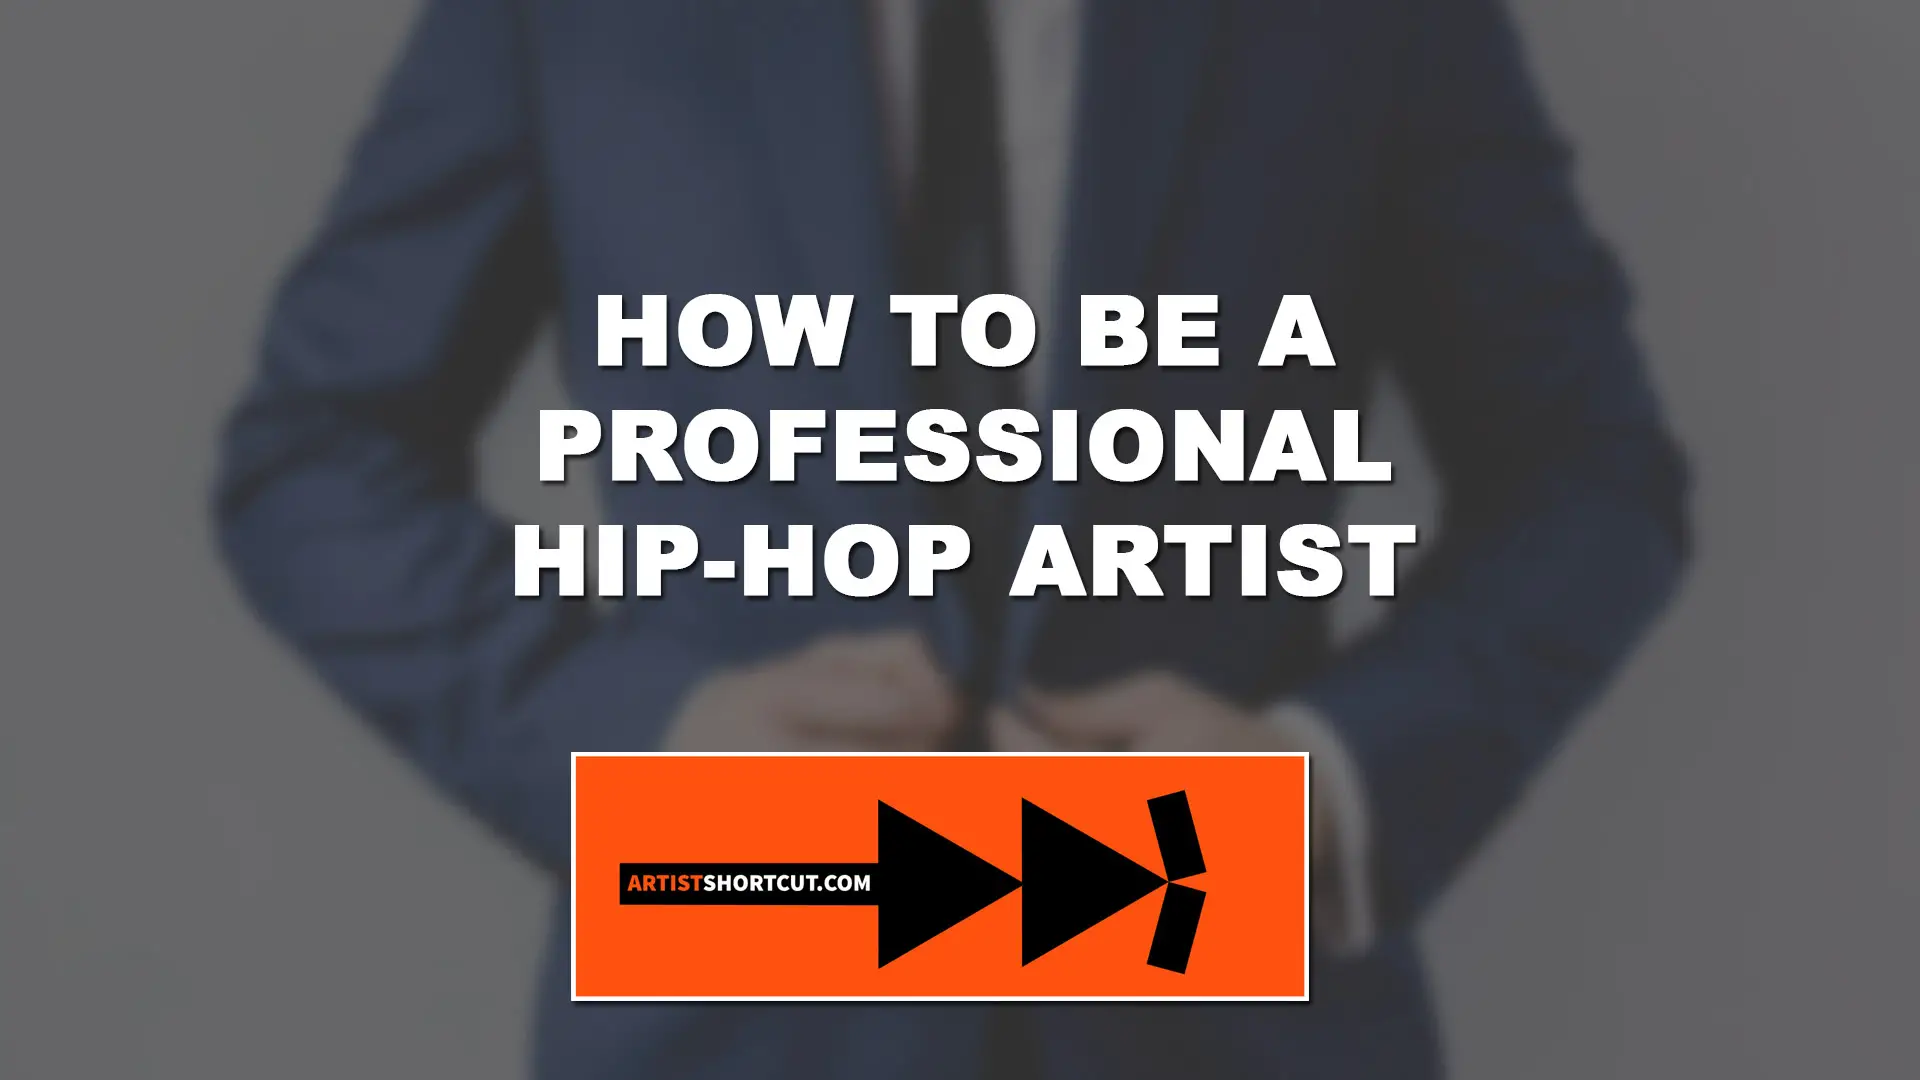 How To Be A Professional Hip-Hop Artist